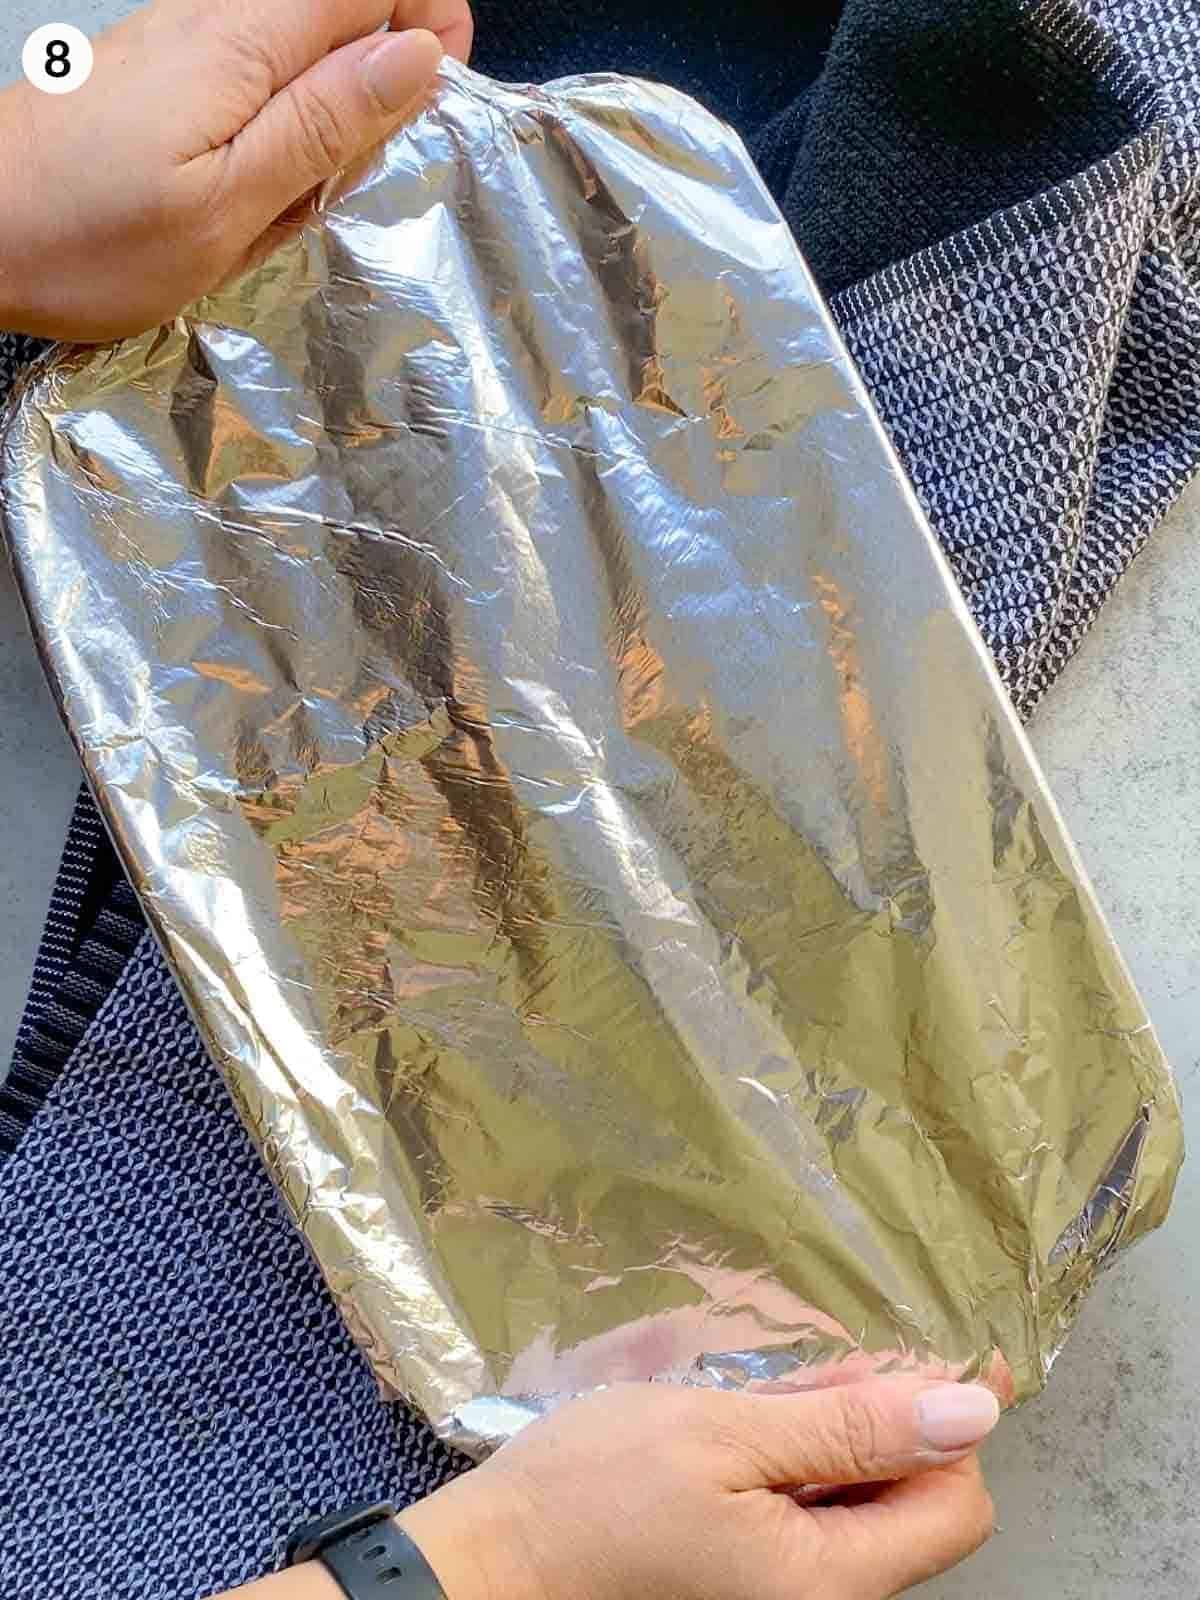 Covering a ceramic side dish with aluminium foil